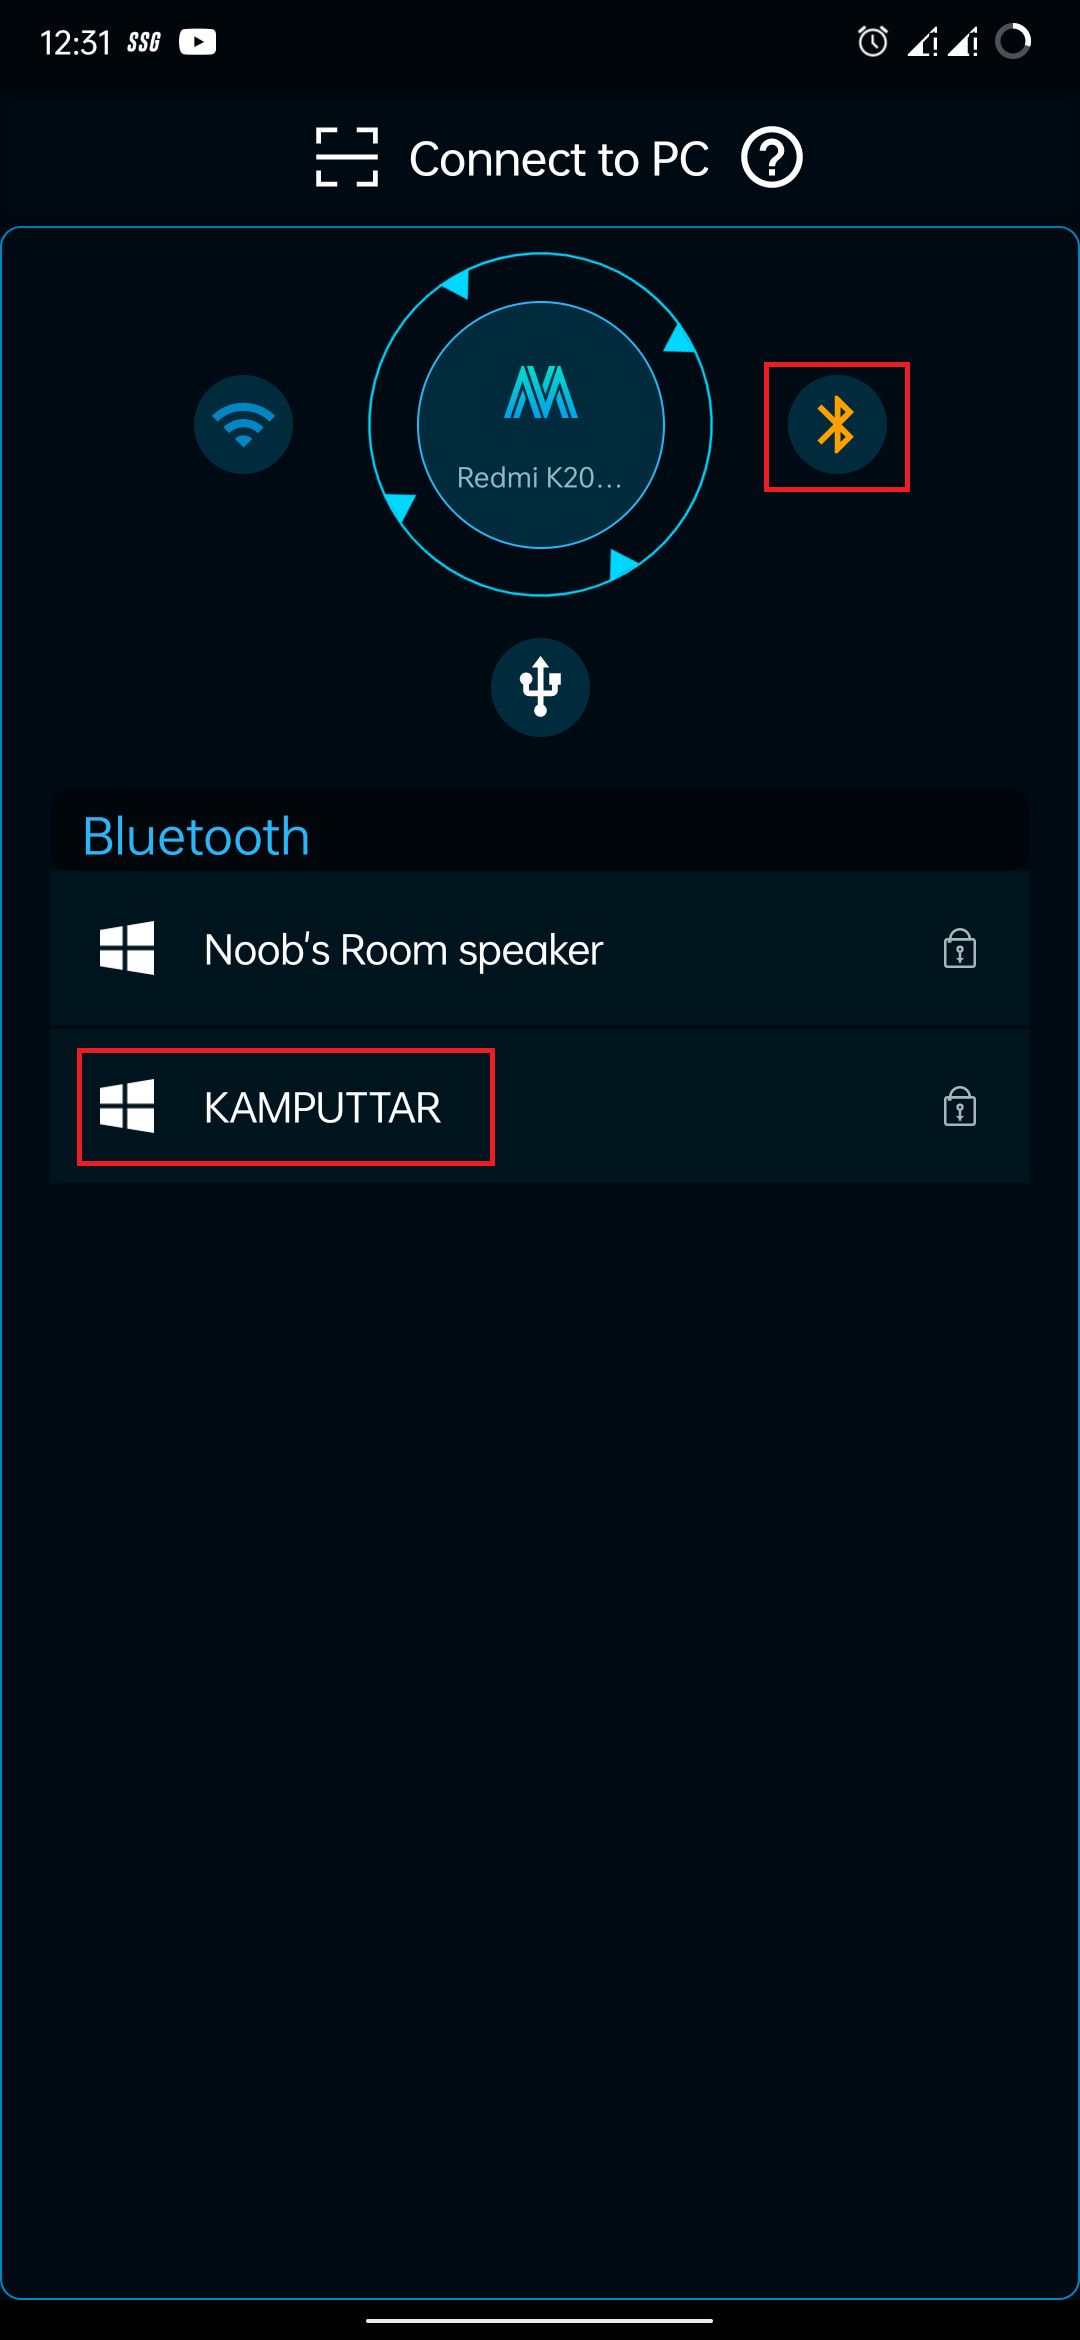 Bluetooth mode and list of available devices